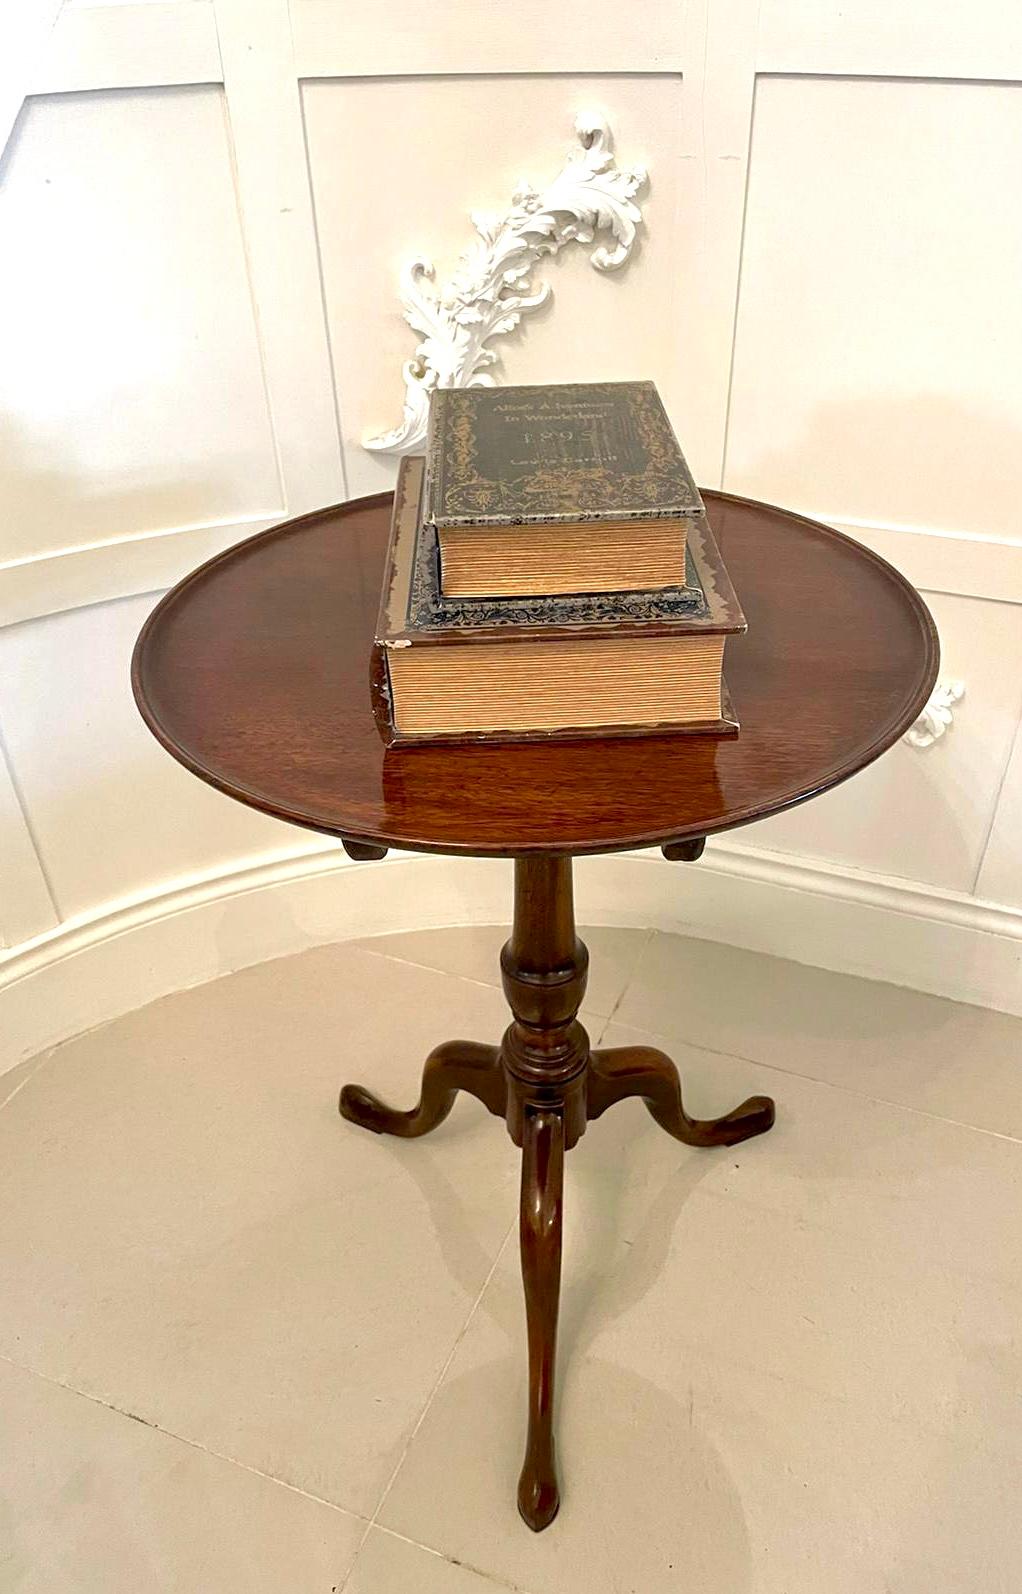 Antique 19th Century George III mahogany dish top tripod table having a lovely quality mahogany dish top supported by an elegant turned shaped column and raised on three attractive shaped cabriolet legs with pad feet.

An attractive example with a